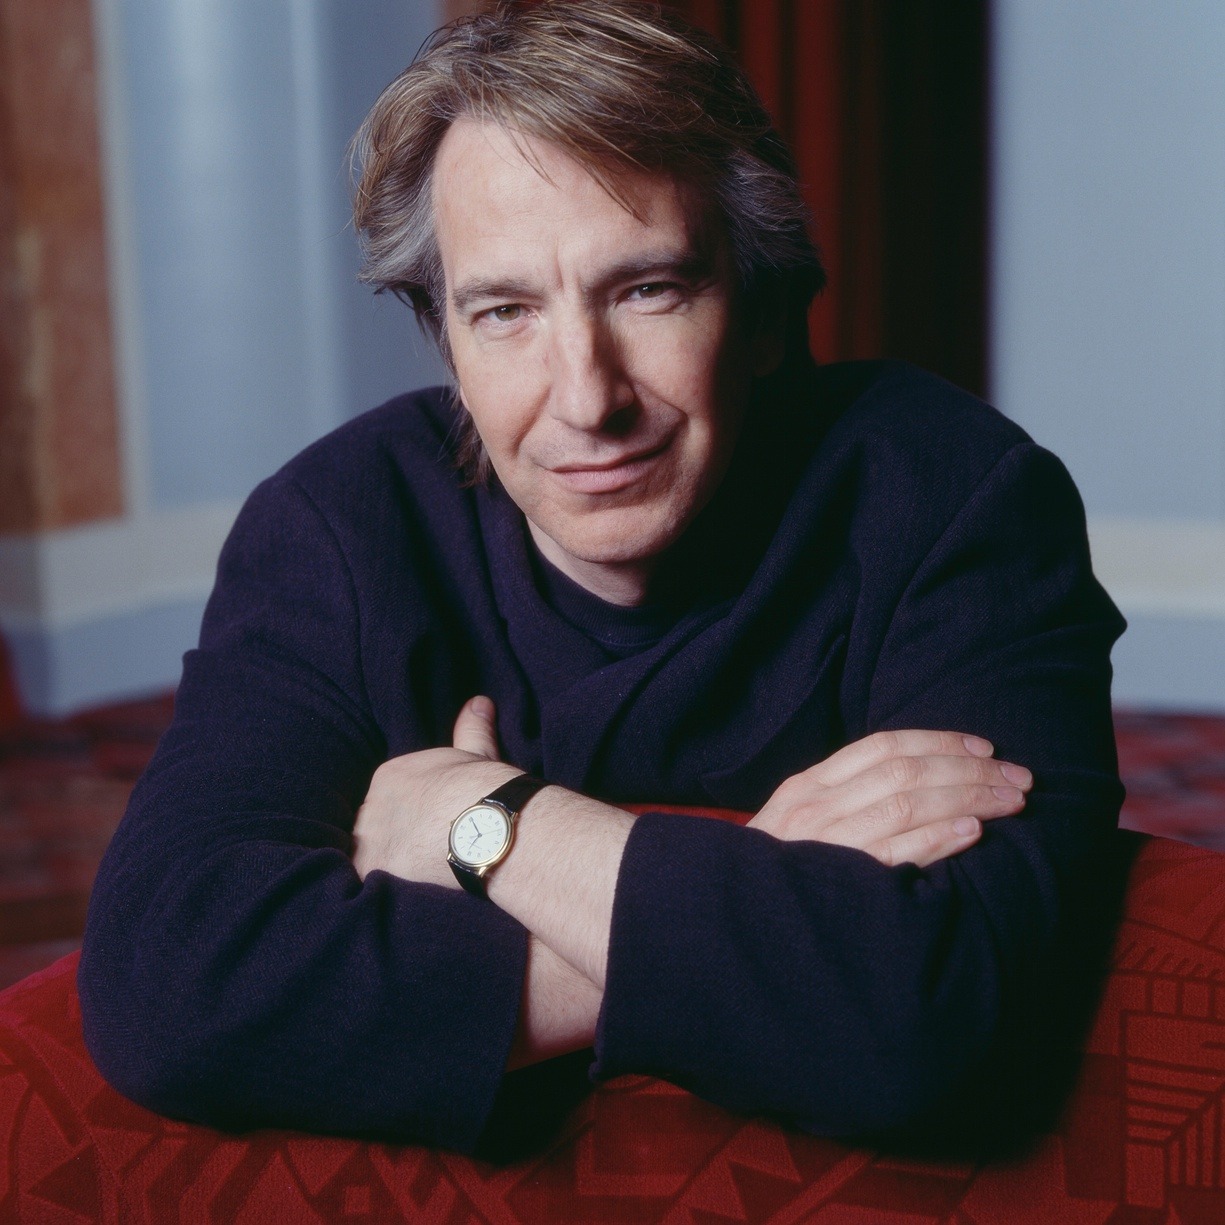 guardian:   Alan Rickman, giant of British film and theatre, dies at 69 Much-loved